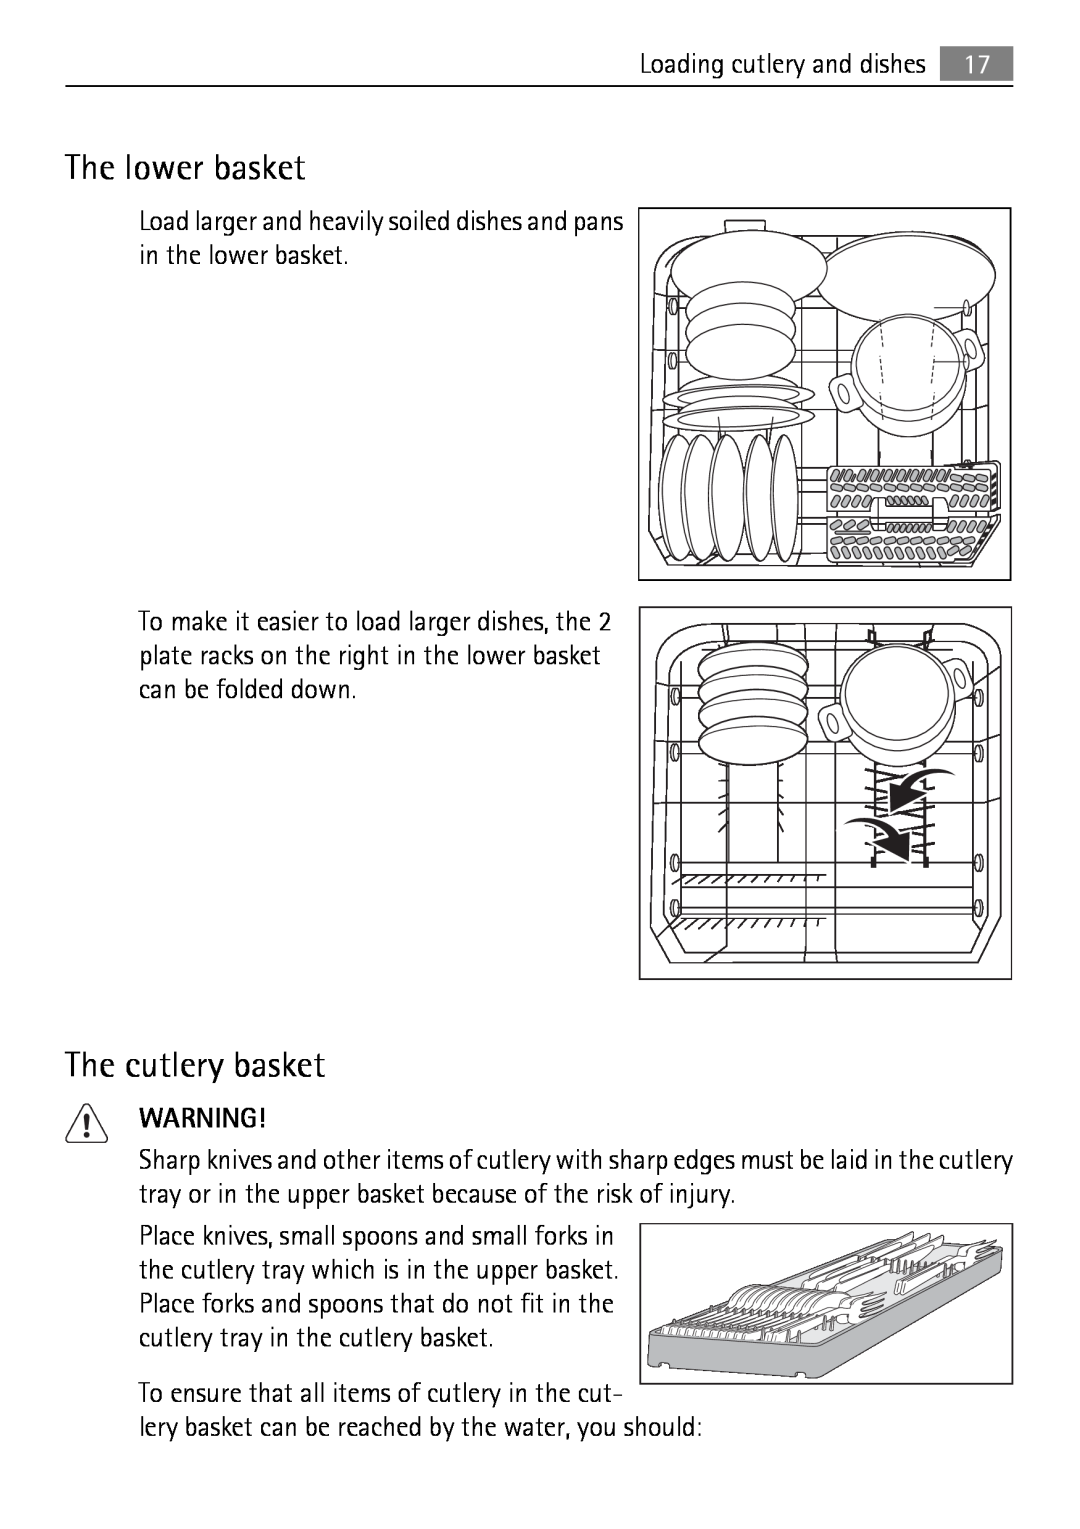 Electrolux 50870 user manual The lower basket, The cutlery basket 